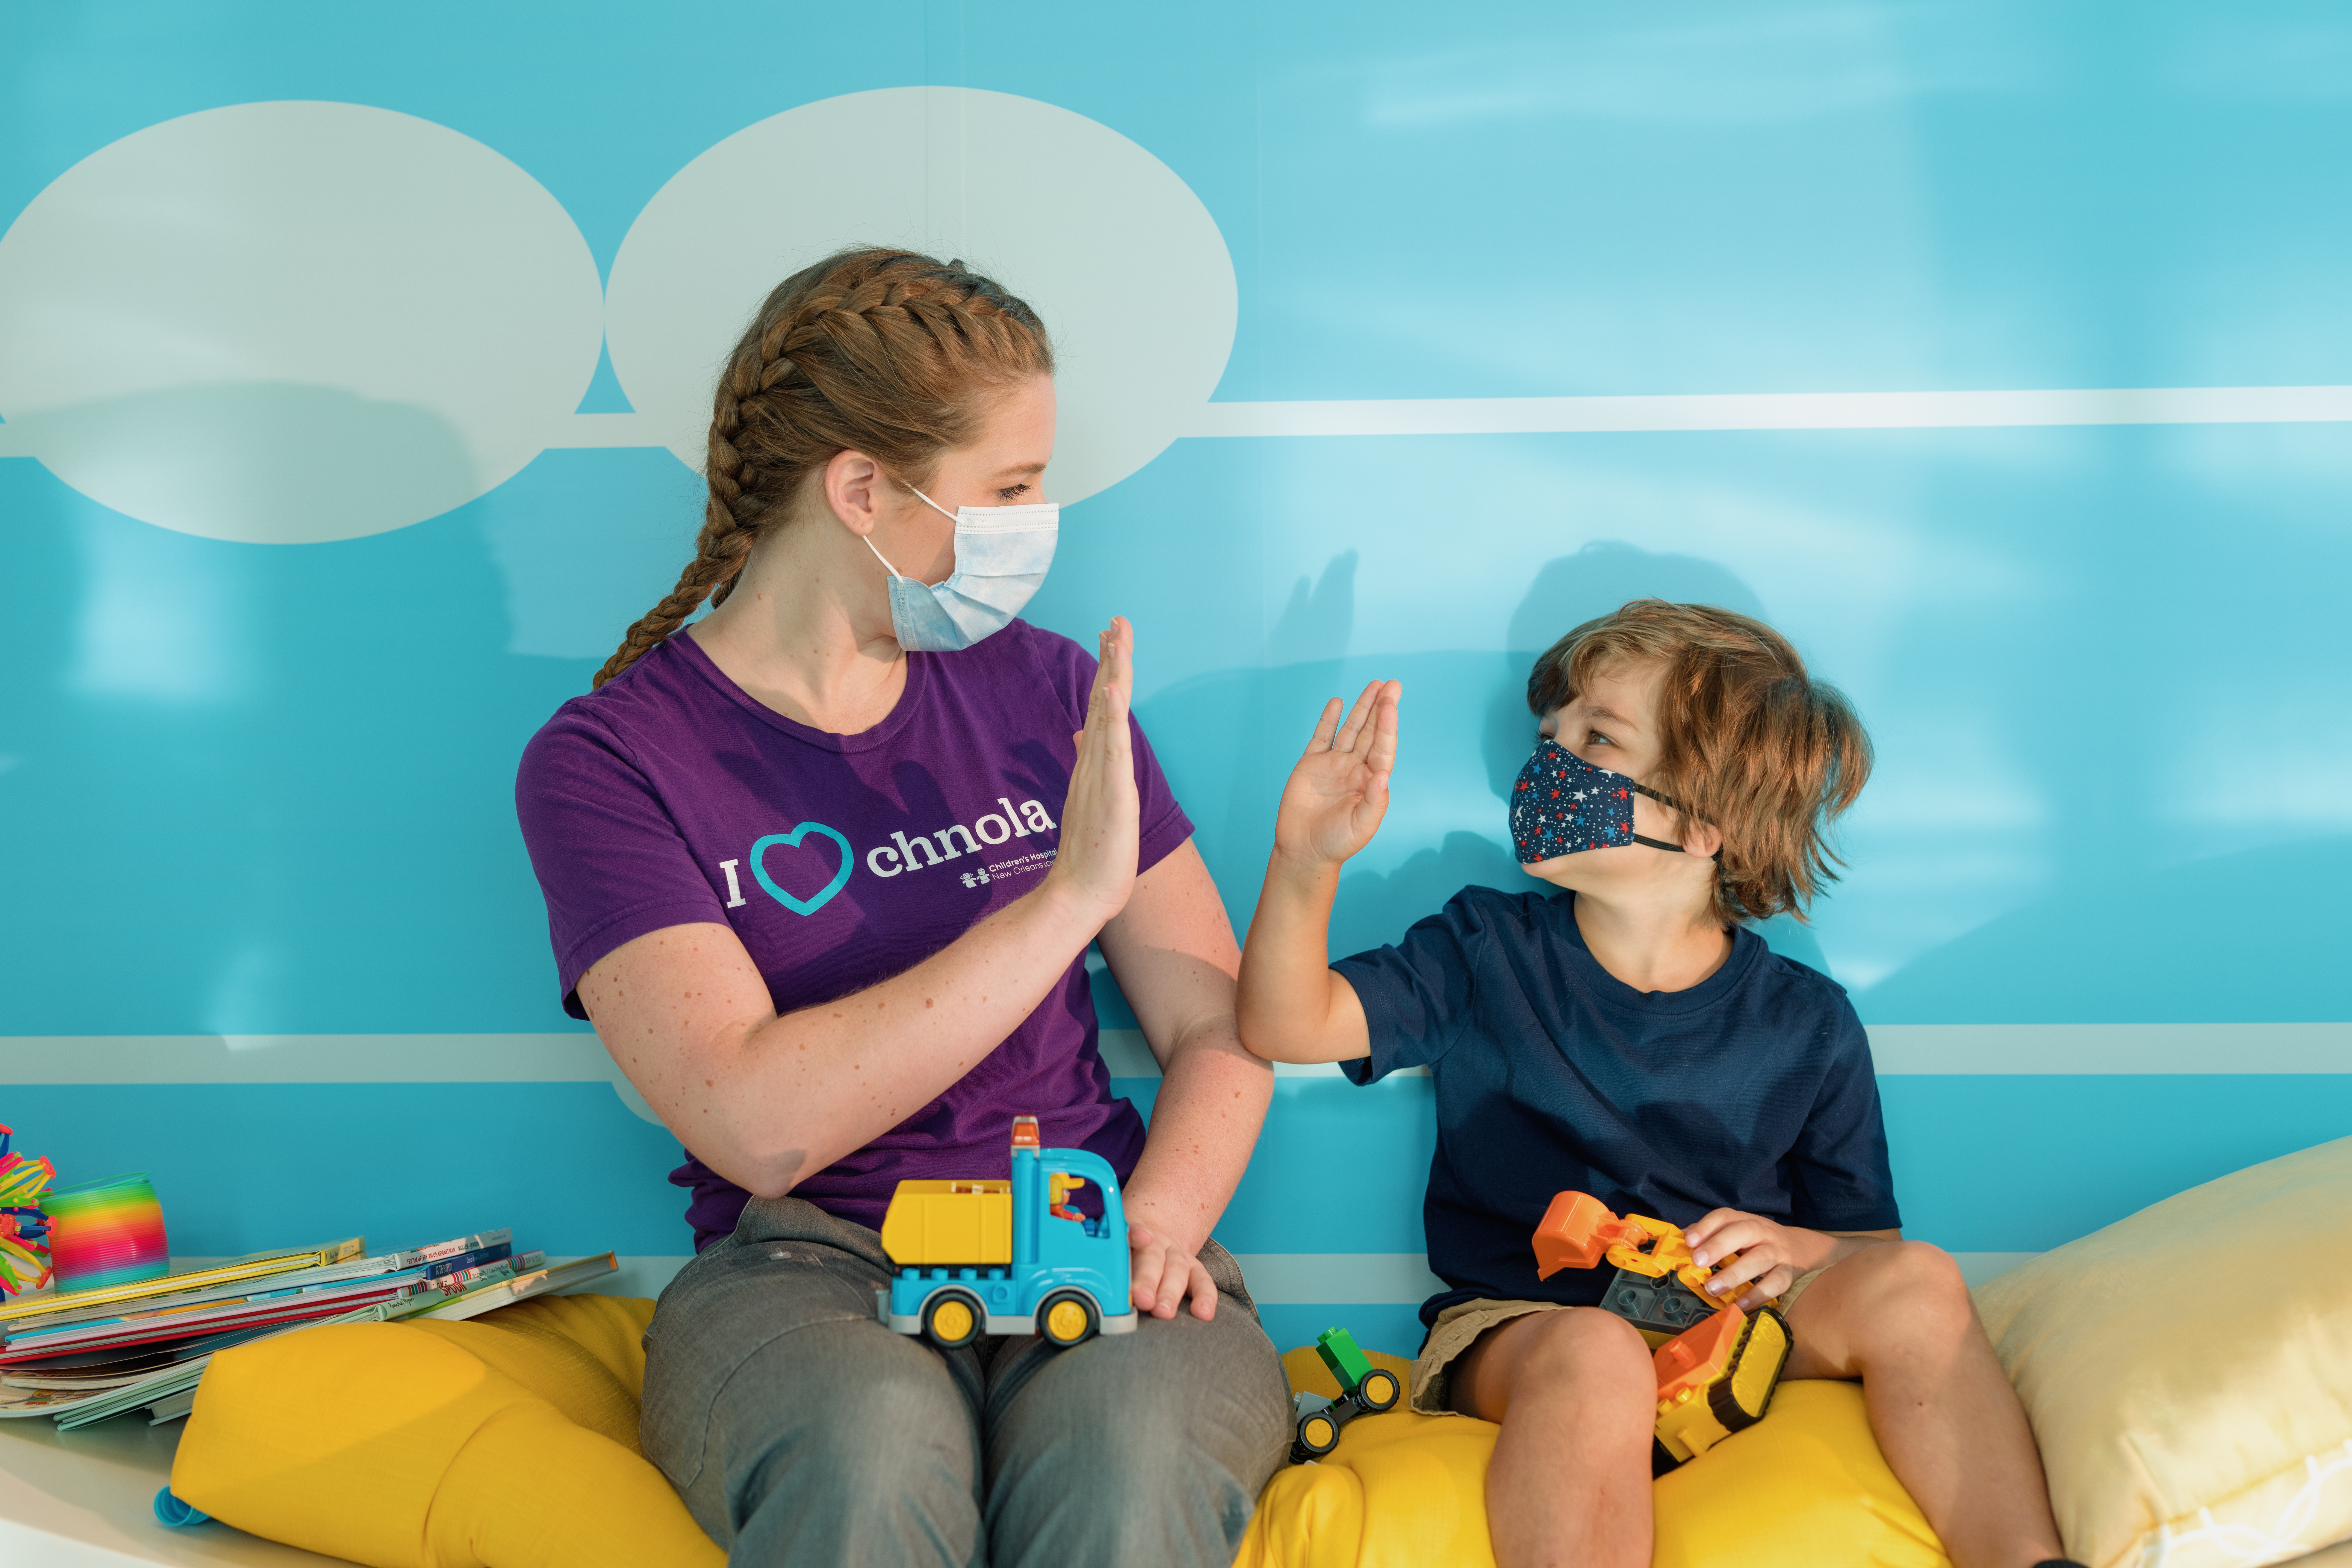 Provider and child high five during therapy